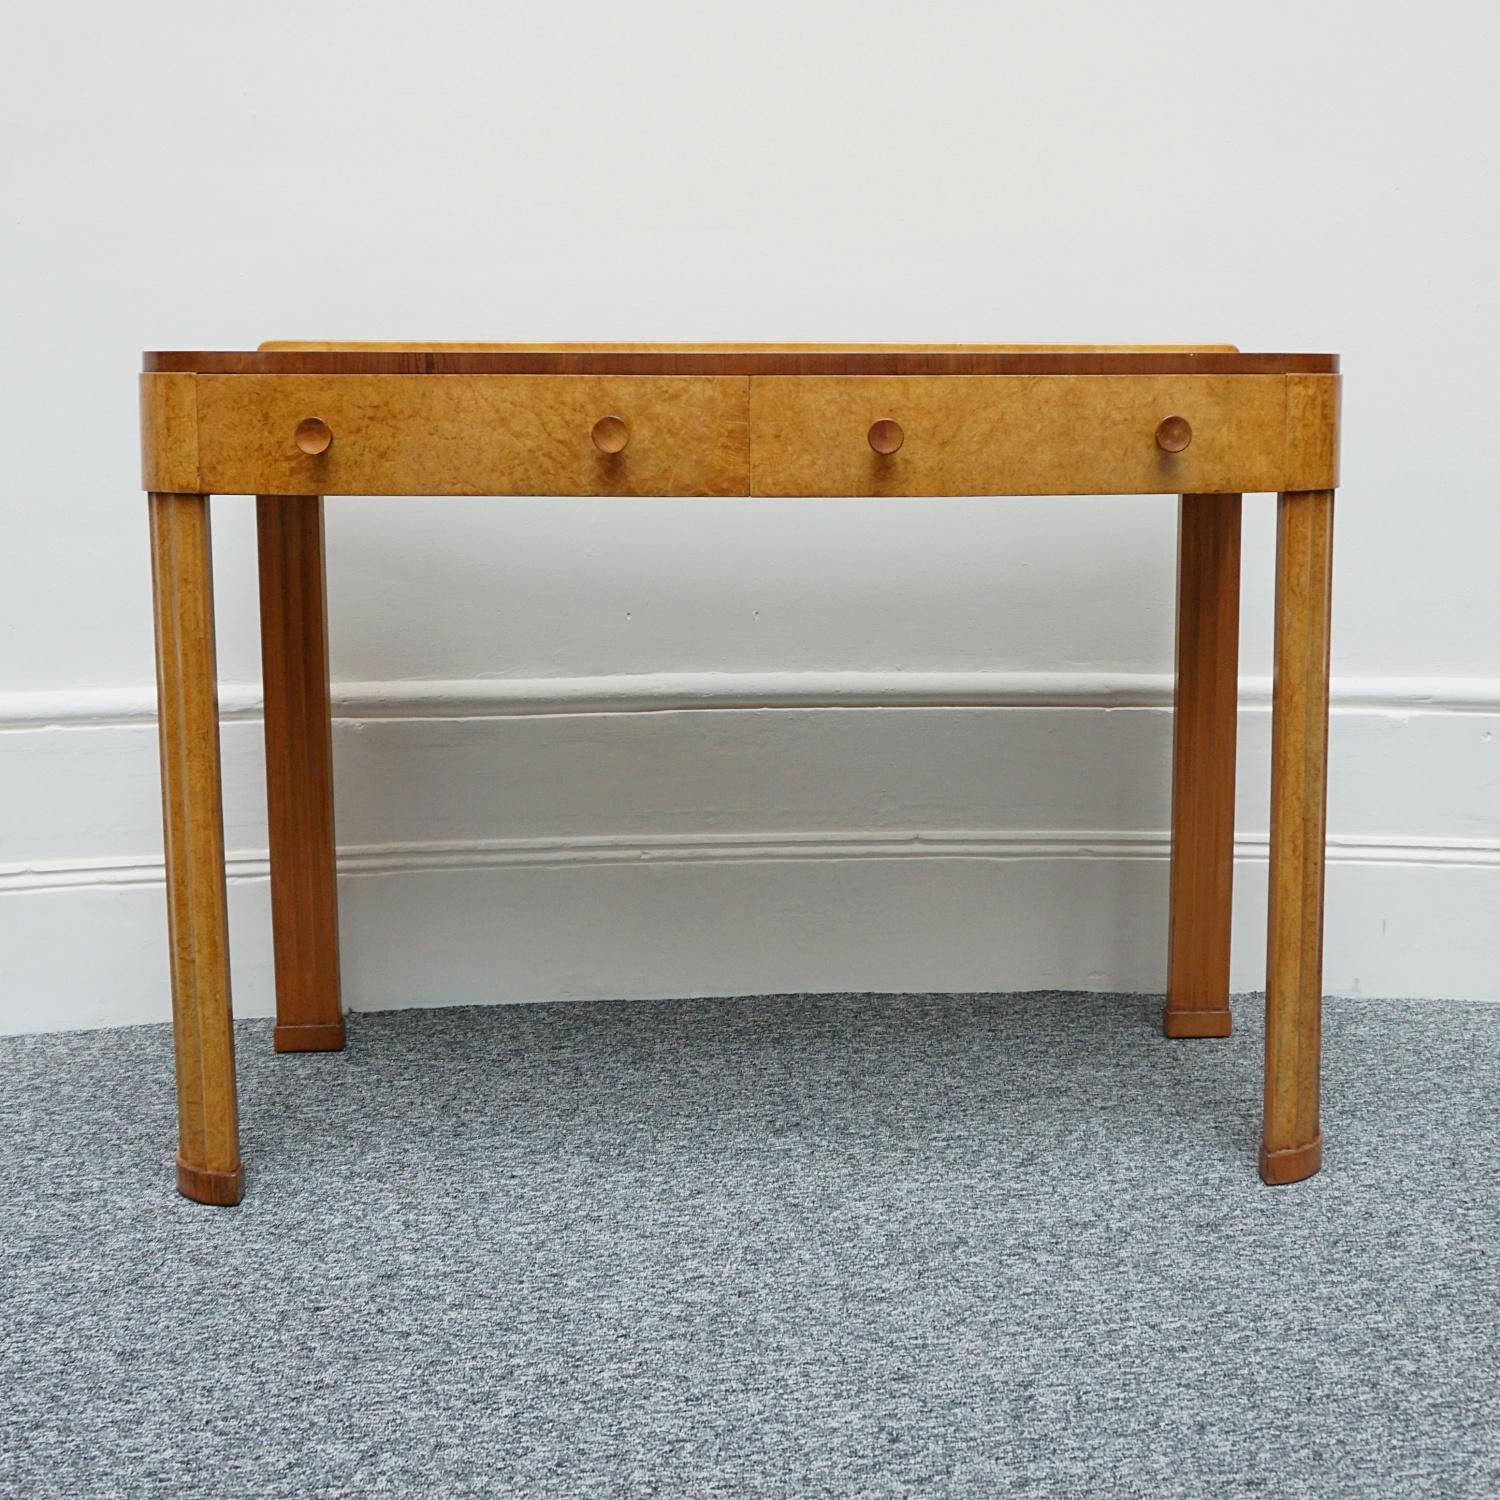 An Art Deco Console table by Harry & Lou Epstein. Burr walnut veneered with figured walnut banding. Original walnut handles and fluted curved legs. 

Dimensions: H 86.5cm, W 122cm, D 57cm.

Origin: English

Date: Circa 1930

Item Number: